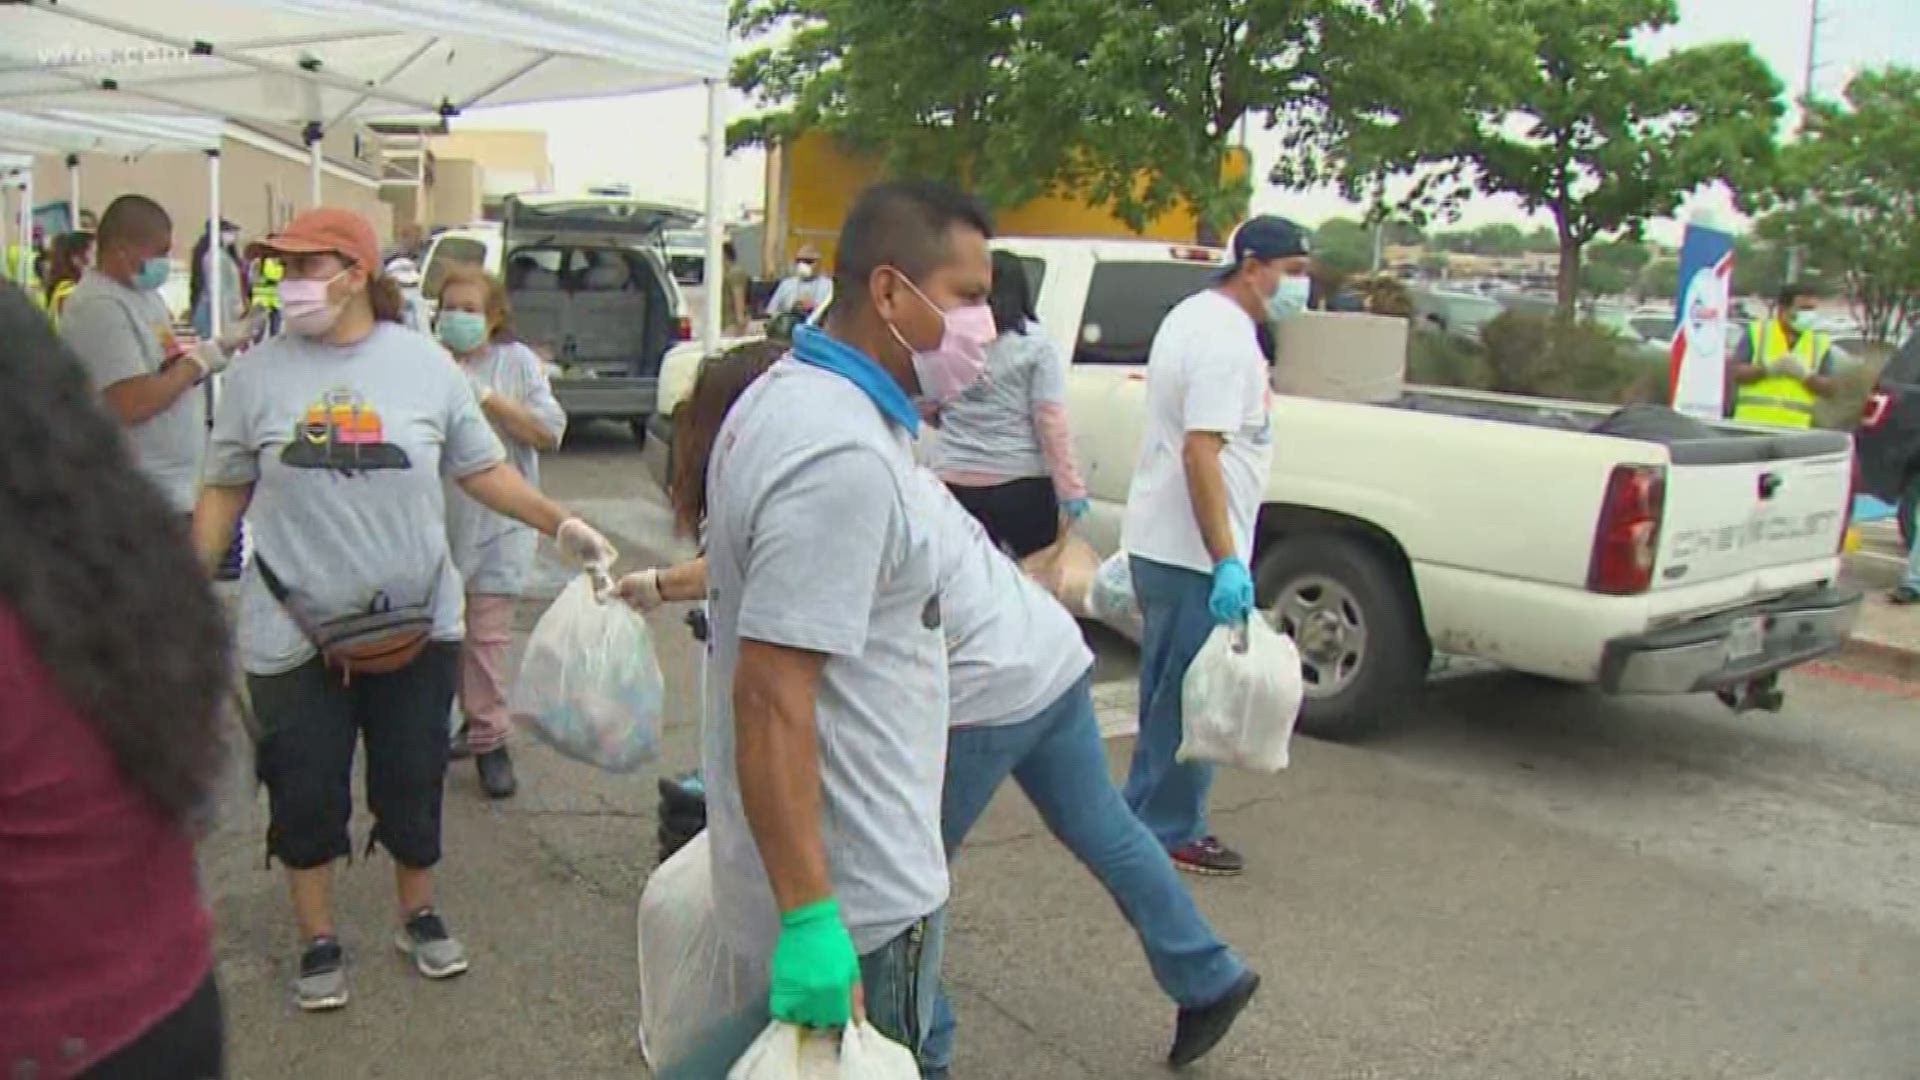 Volunteers in Irving sent more than a thousand families home with enough groceries to make sure they don't miss out on Easter dinner.